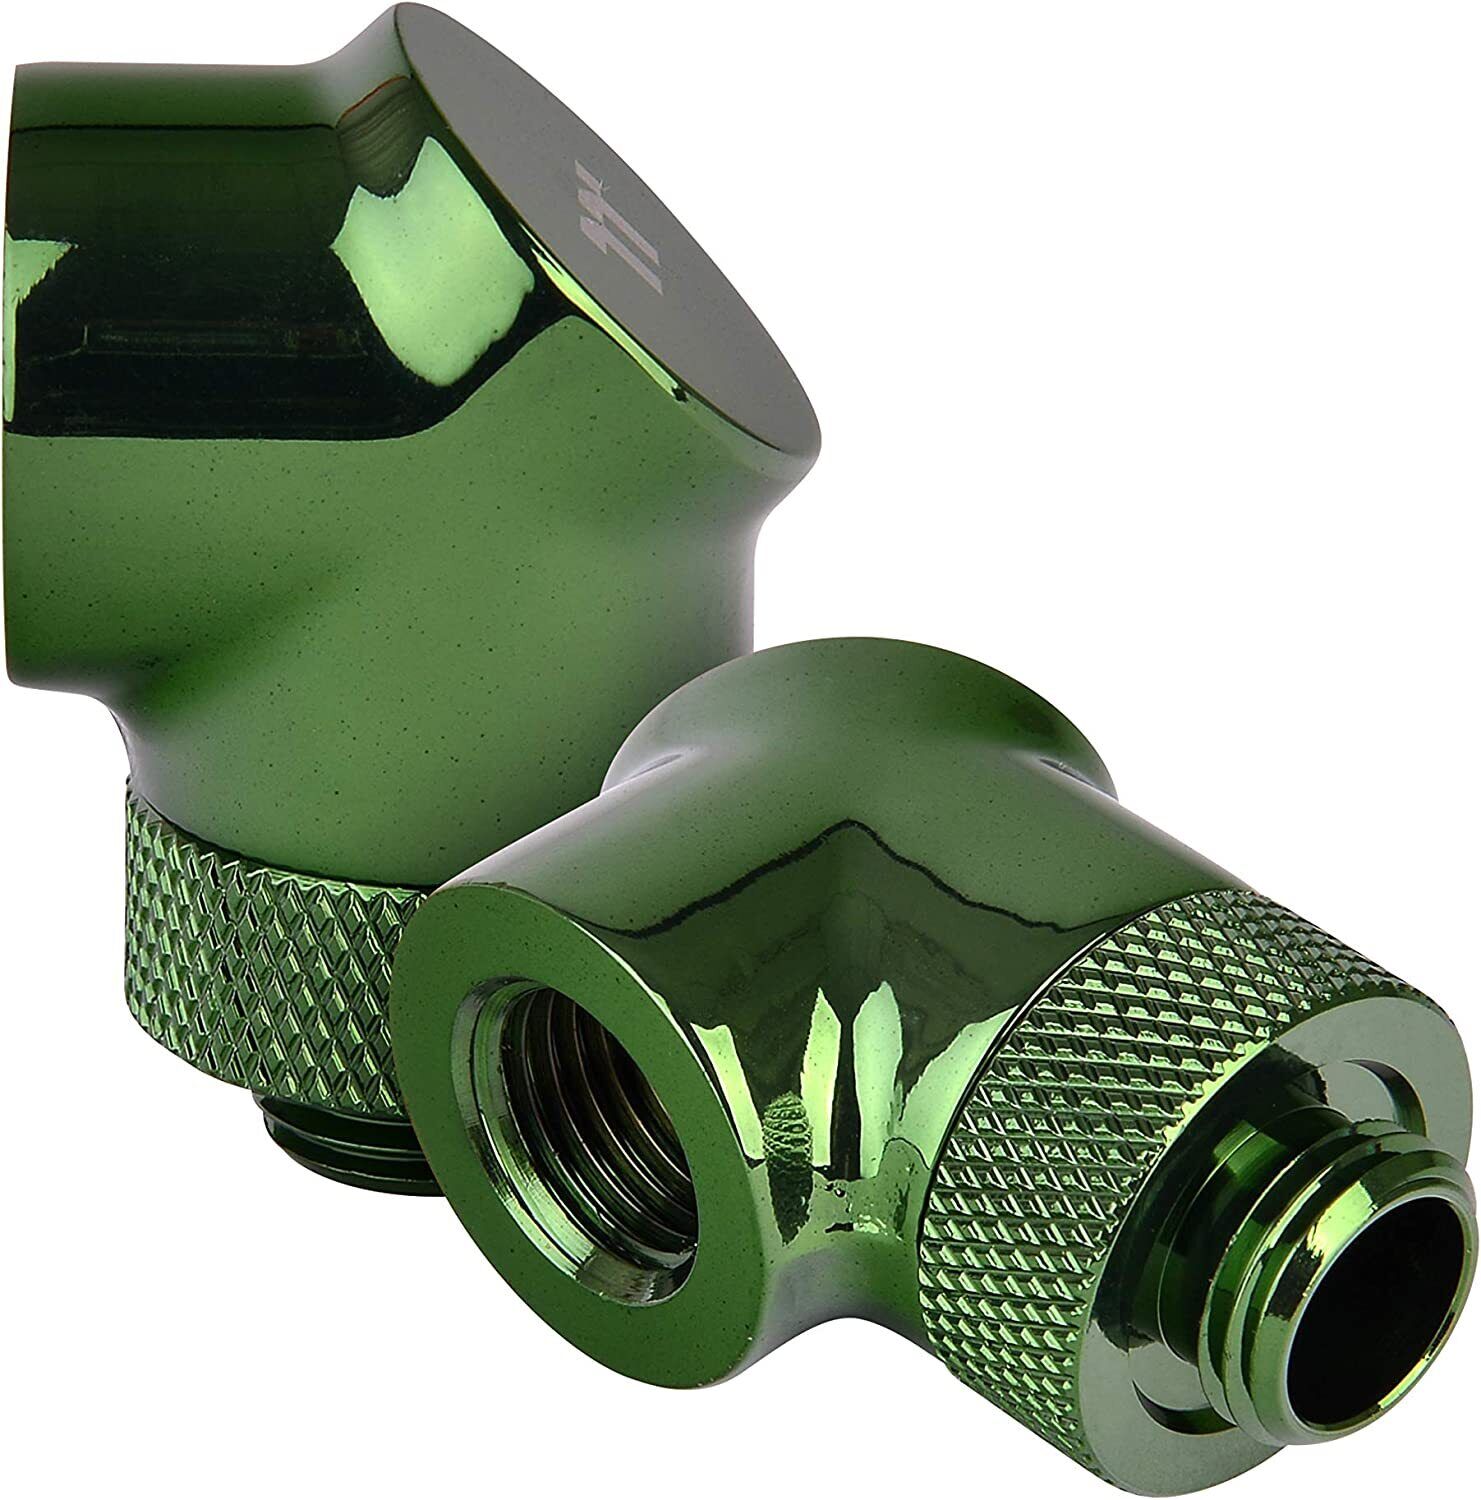 Thermaltake Pacific DIY LCS G1/4 90 Degree Adapter Fitting, Green - 2 Pack